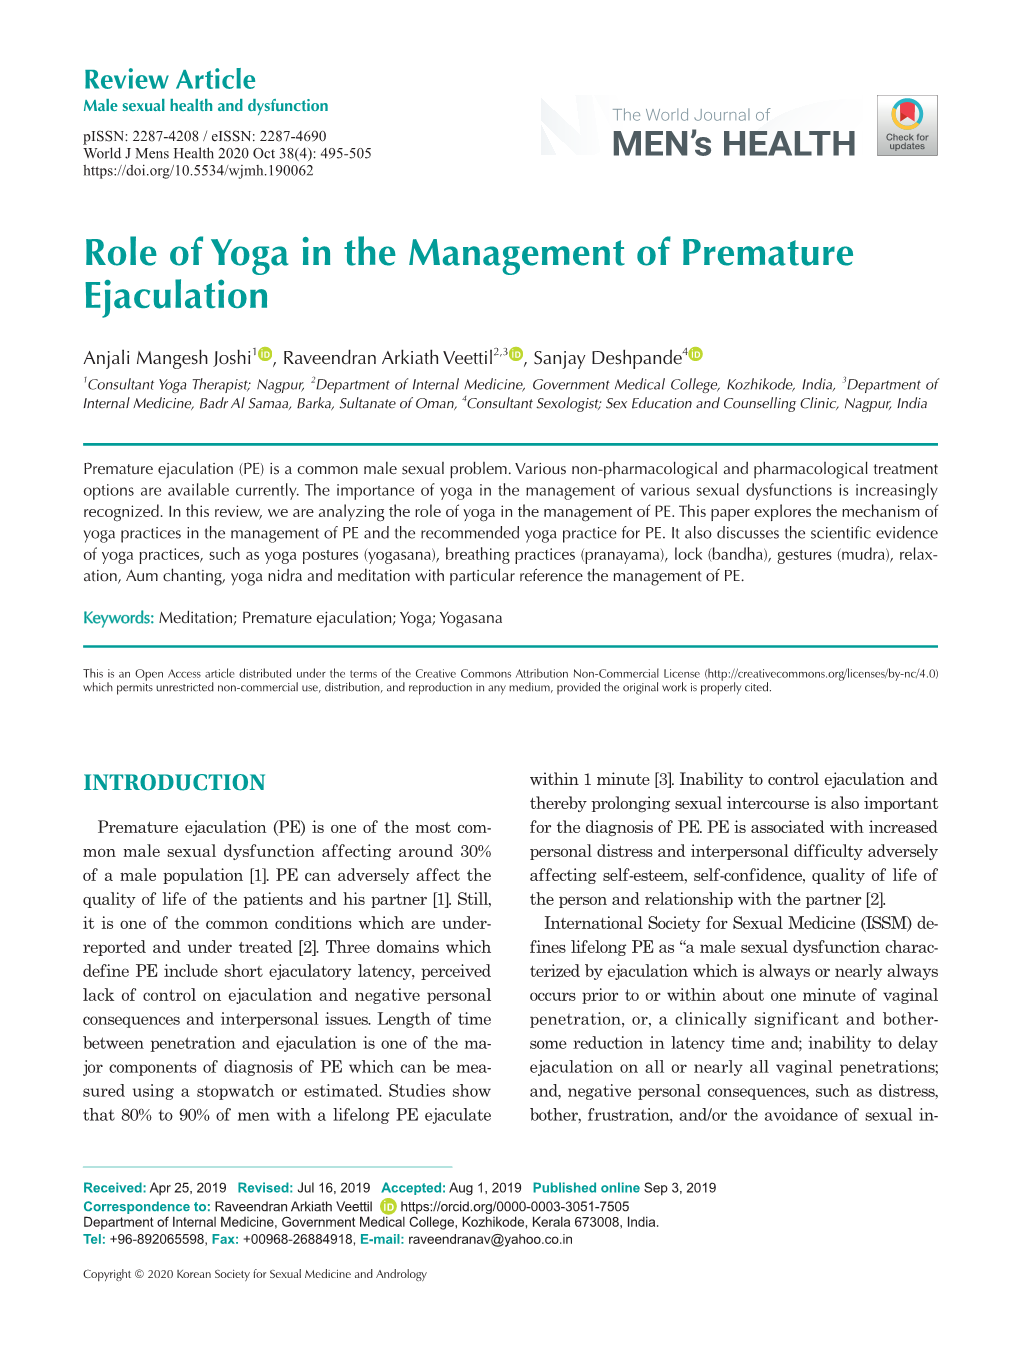 Role of Yoga in the Management of Premature Ejaculation